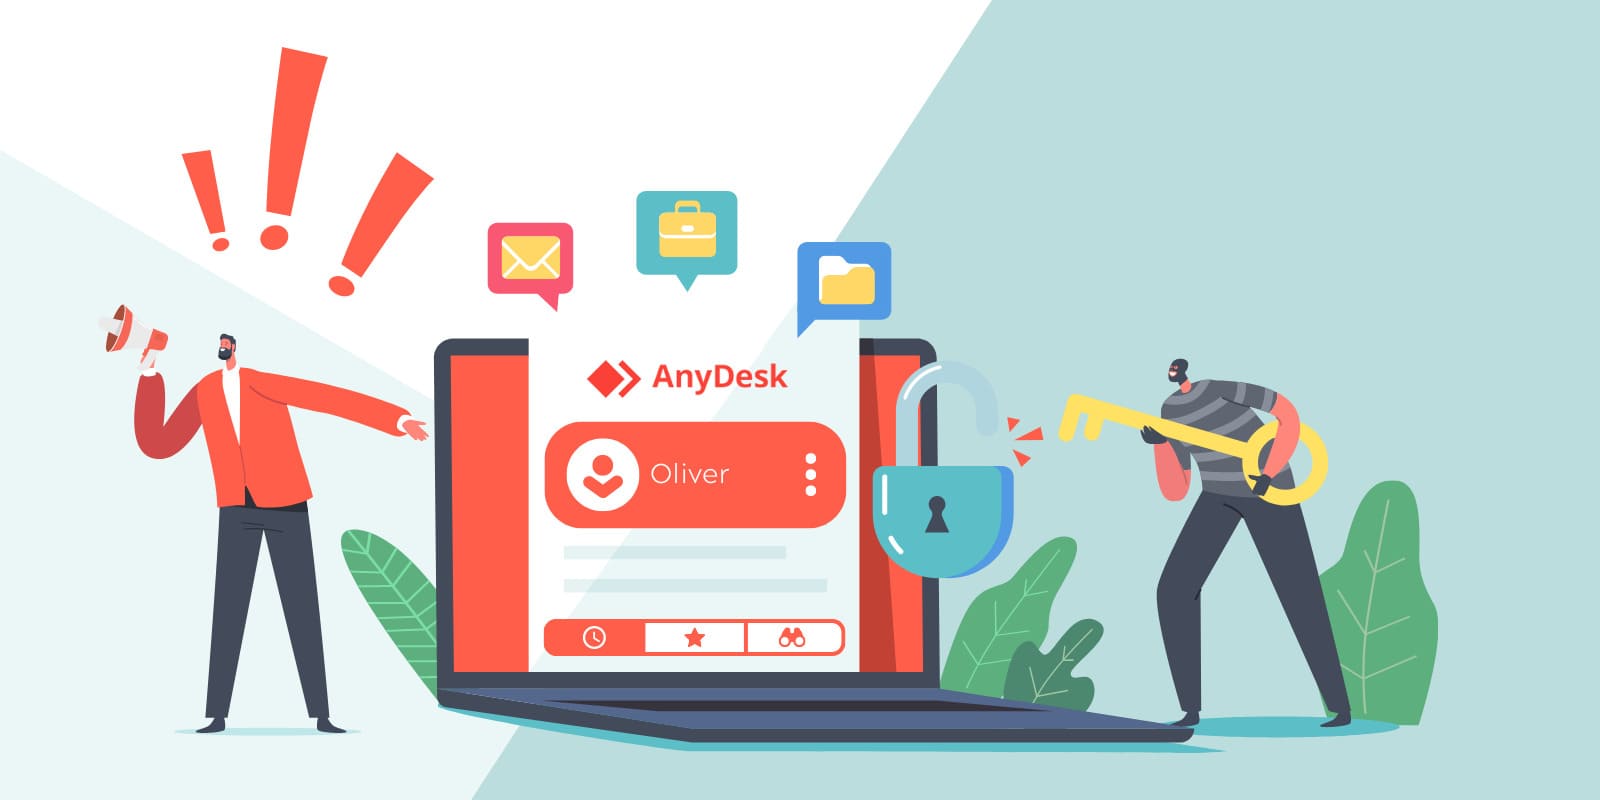 How You Can Avoid AnyDesk Scams and use the Tool Safely